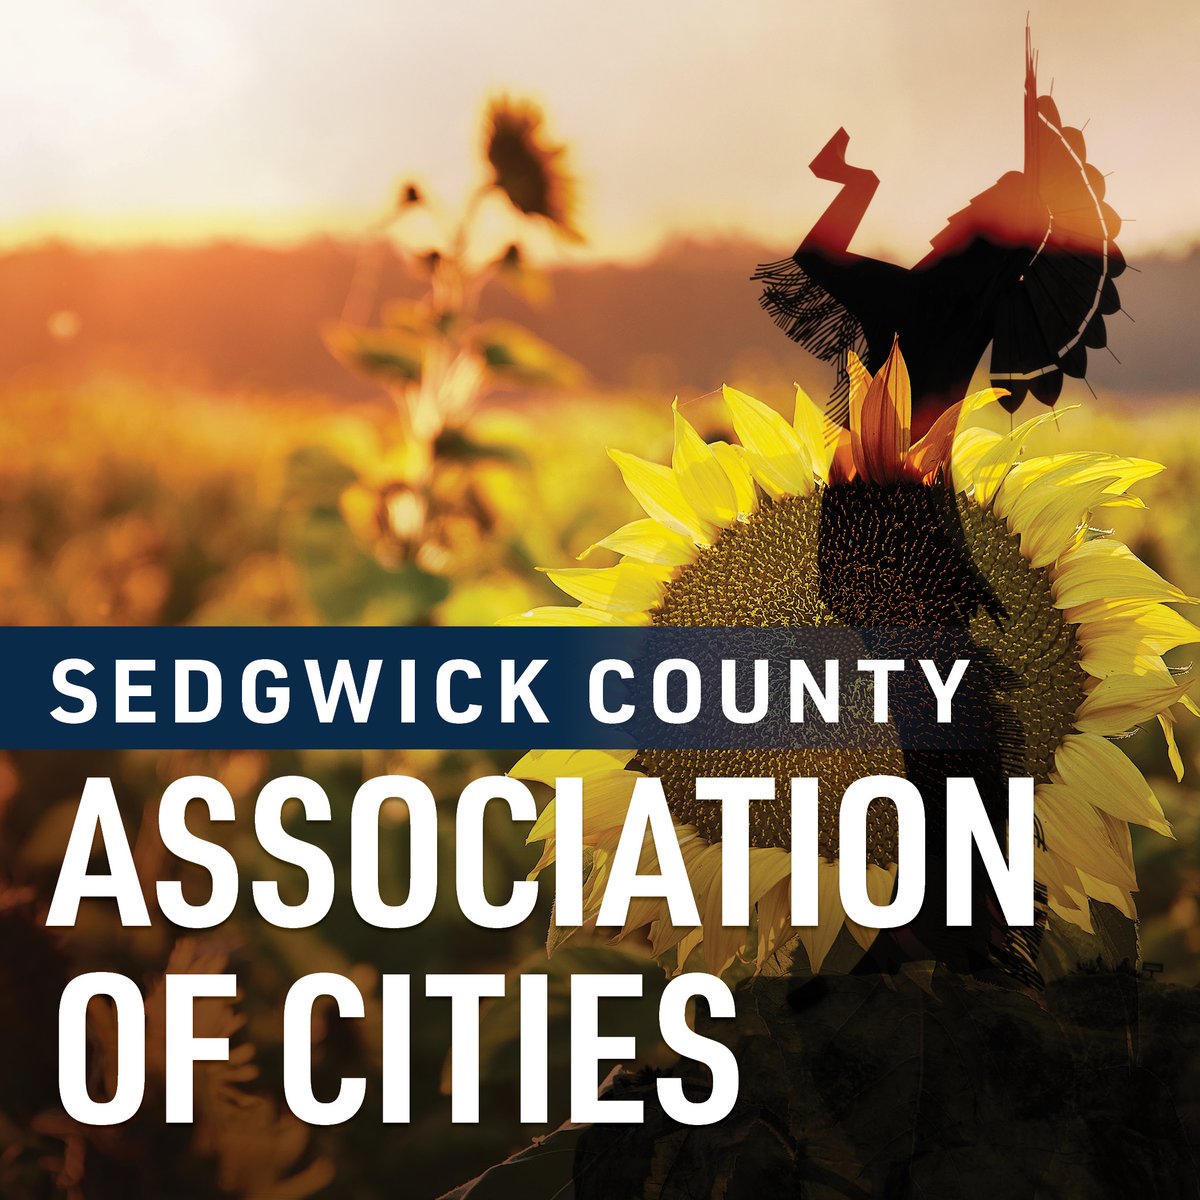 The next Sedgwick County Association of Cities (SCAC) meeting is Saturday, May 11 from 8:30 - 10 a.m. This meeting will be located at the Haysville Senior Center, 160 E. Karla Avenue.